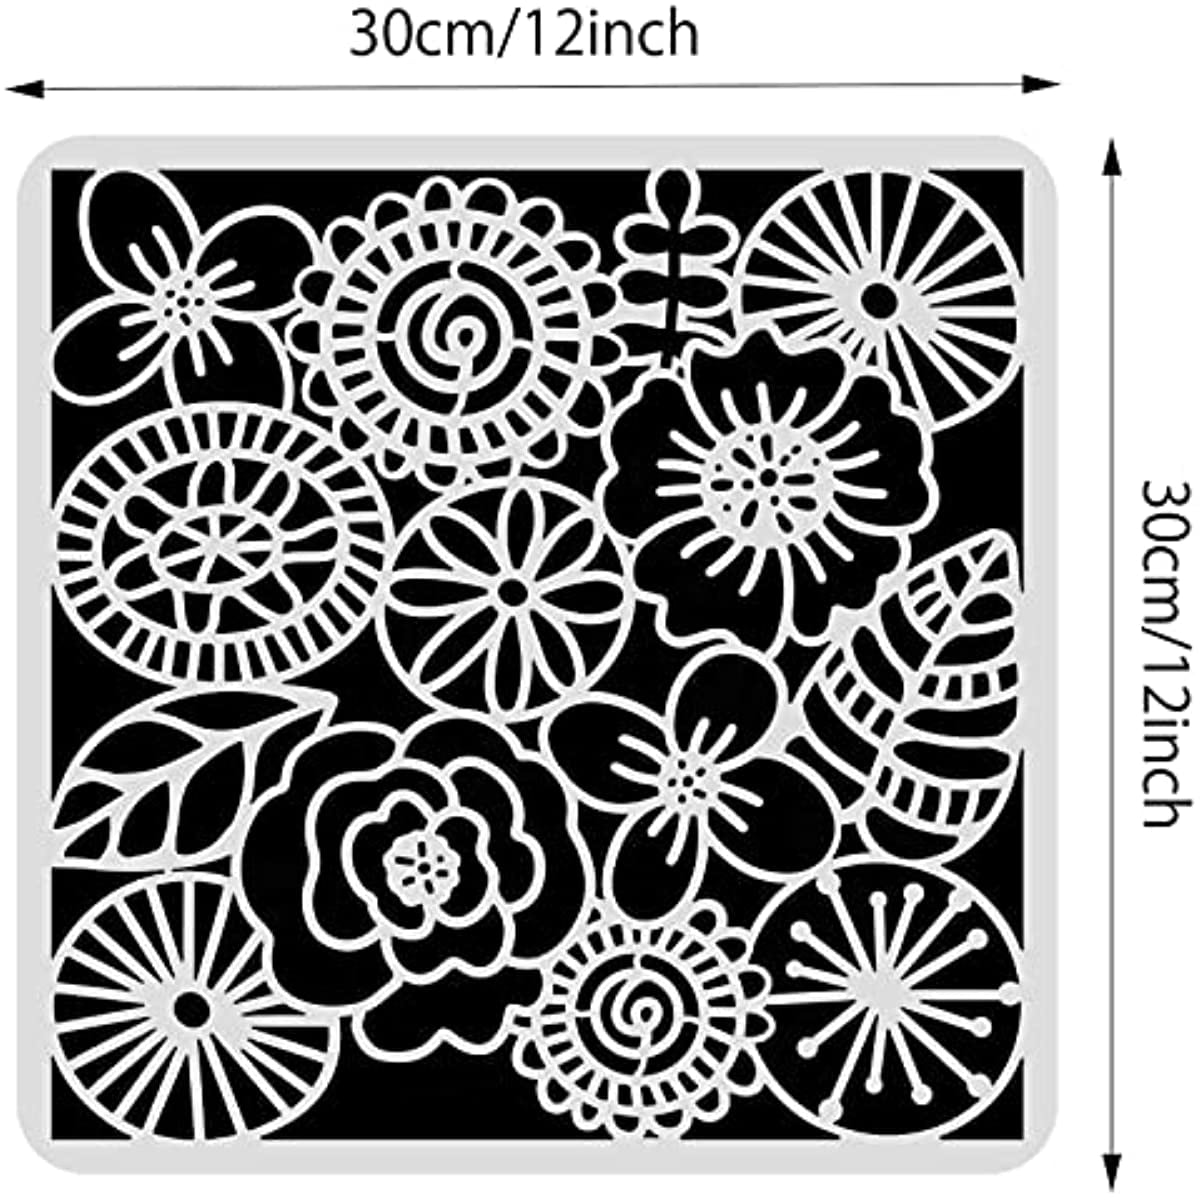 Large 12x12 Inch Dahlia Stencil for Painting on Wood, Canvas, Paper,  Fabric, Walls and Furniture - Flower Stencil - Reusable DIY Art and Craft